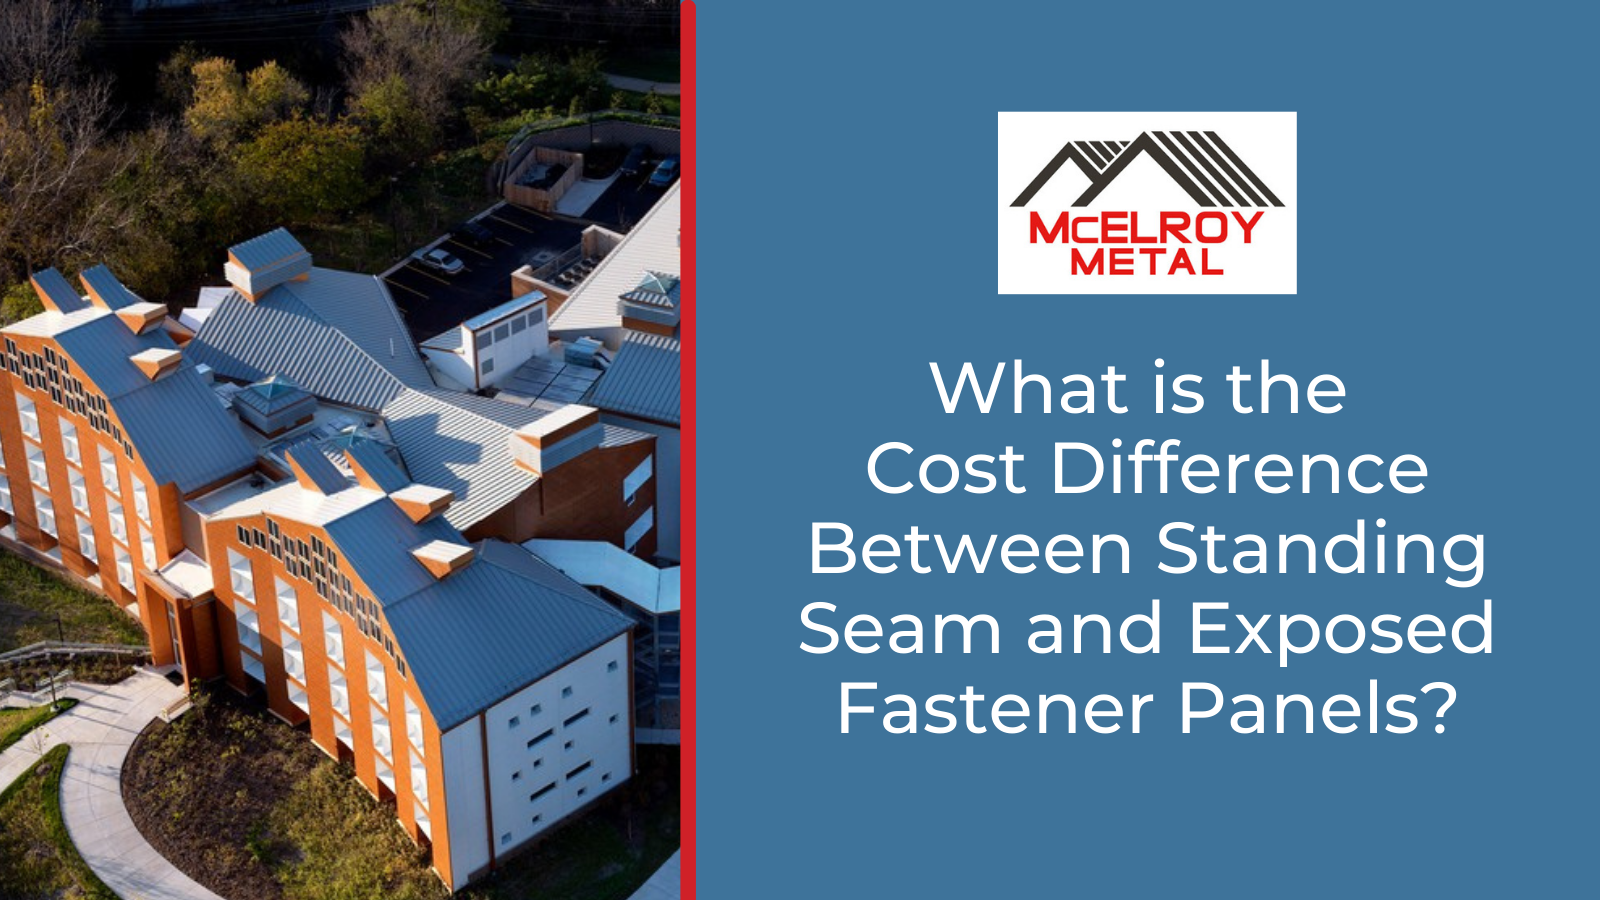 What is the Cost Difference Between Standing Seam and Exposed Fastener Panels?